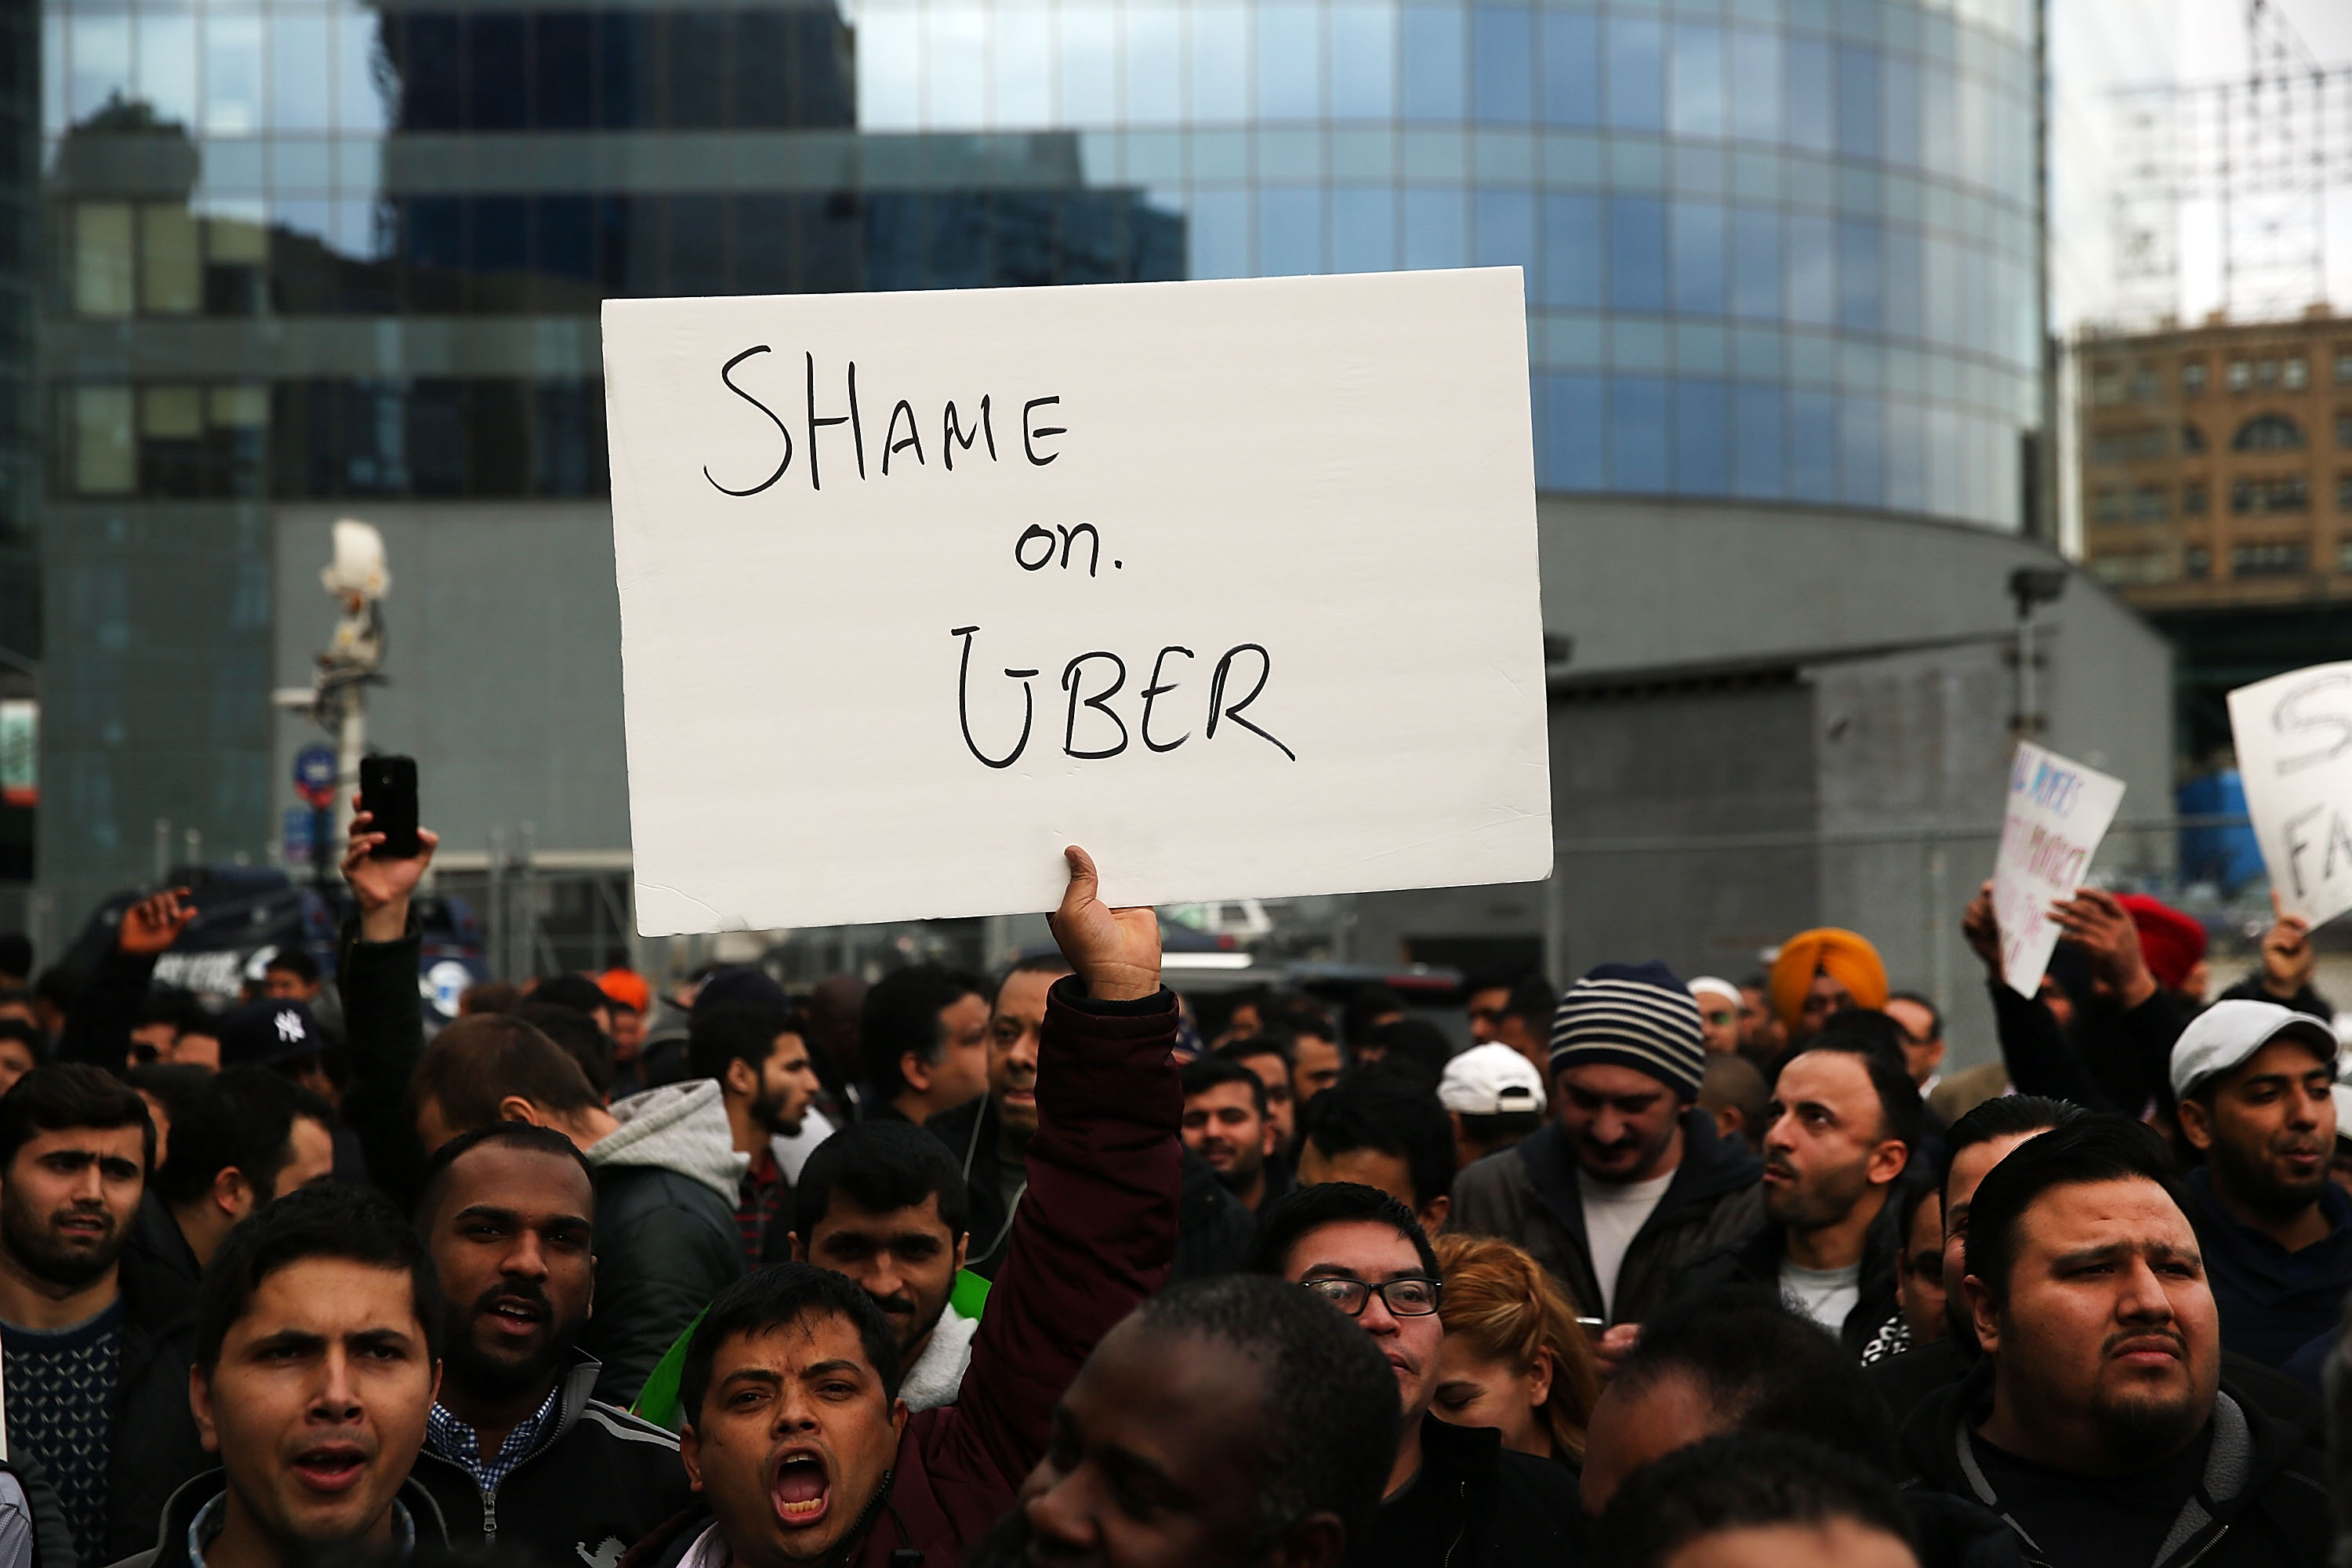 An anti-Uber protest.